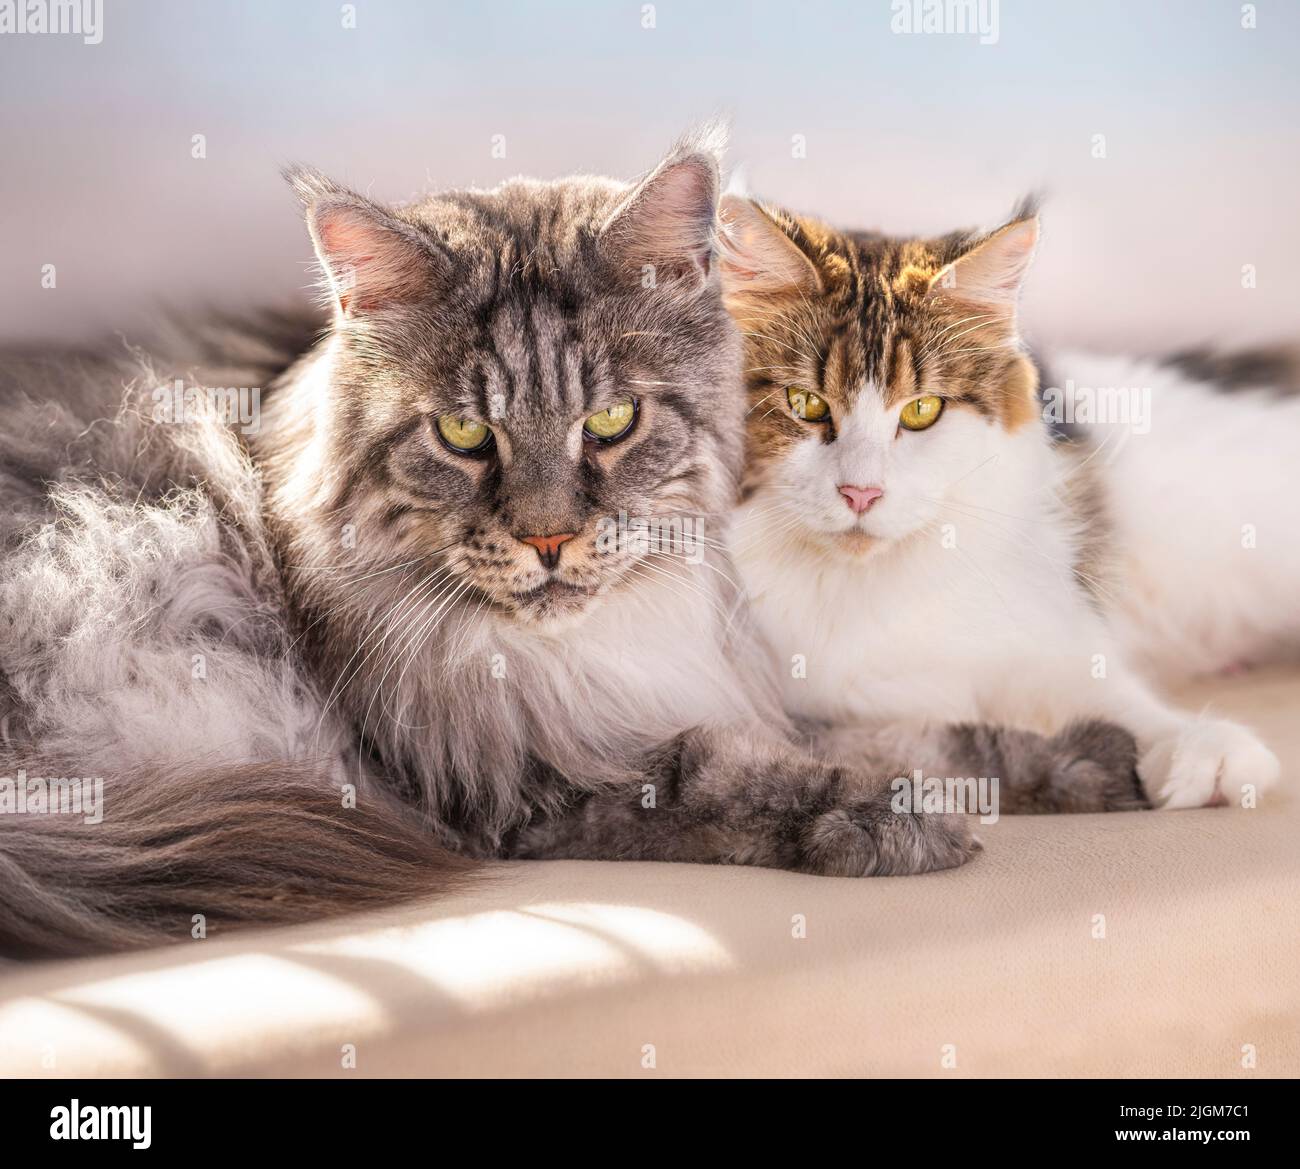 Male and female adult Maine Coon Cat pair lying close together ON SOFA Stock Photo